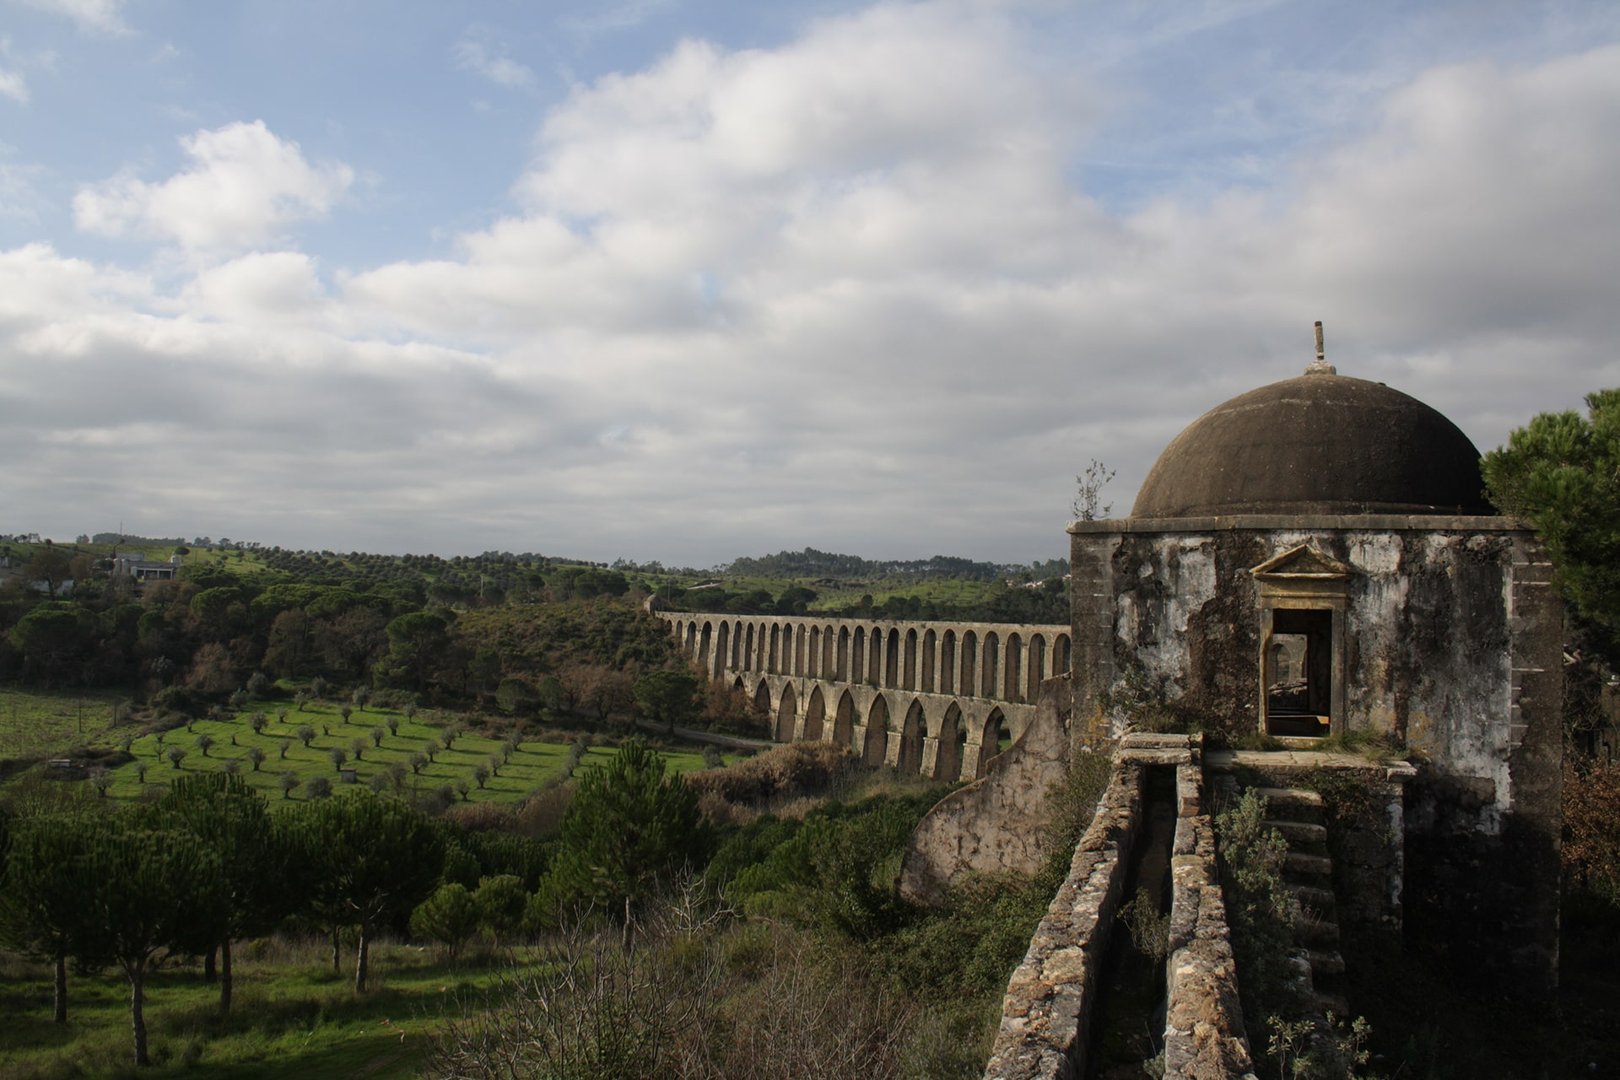 The project for this aqueduct was carried out in 1584 by the renowned Filipe Terzi, the chief architect of the Kingdom